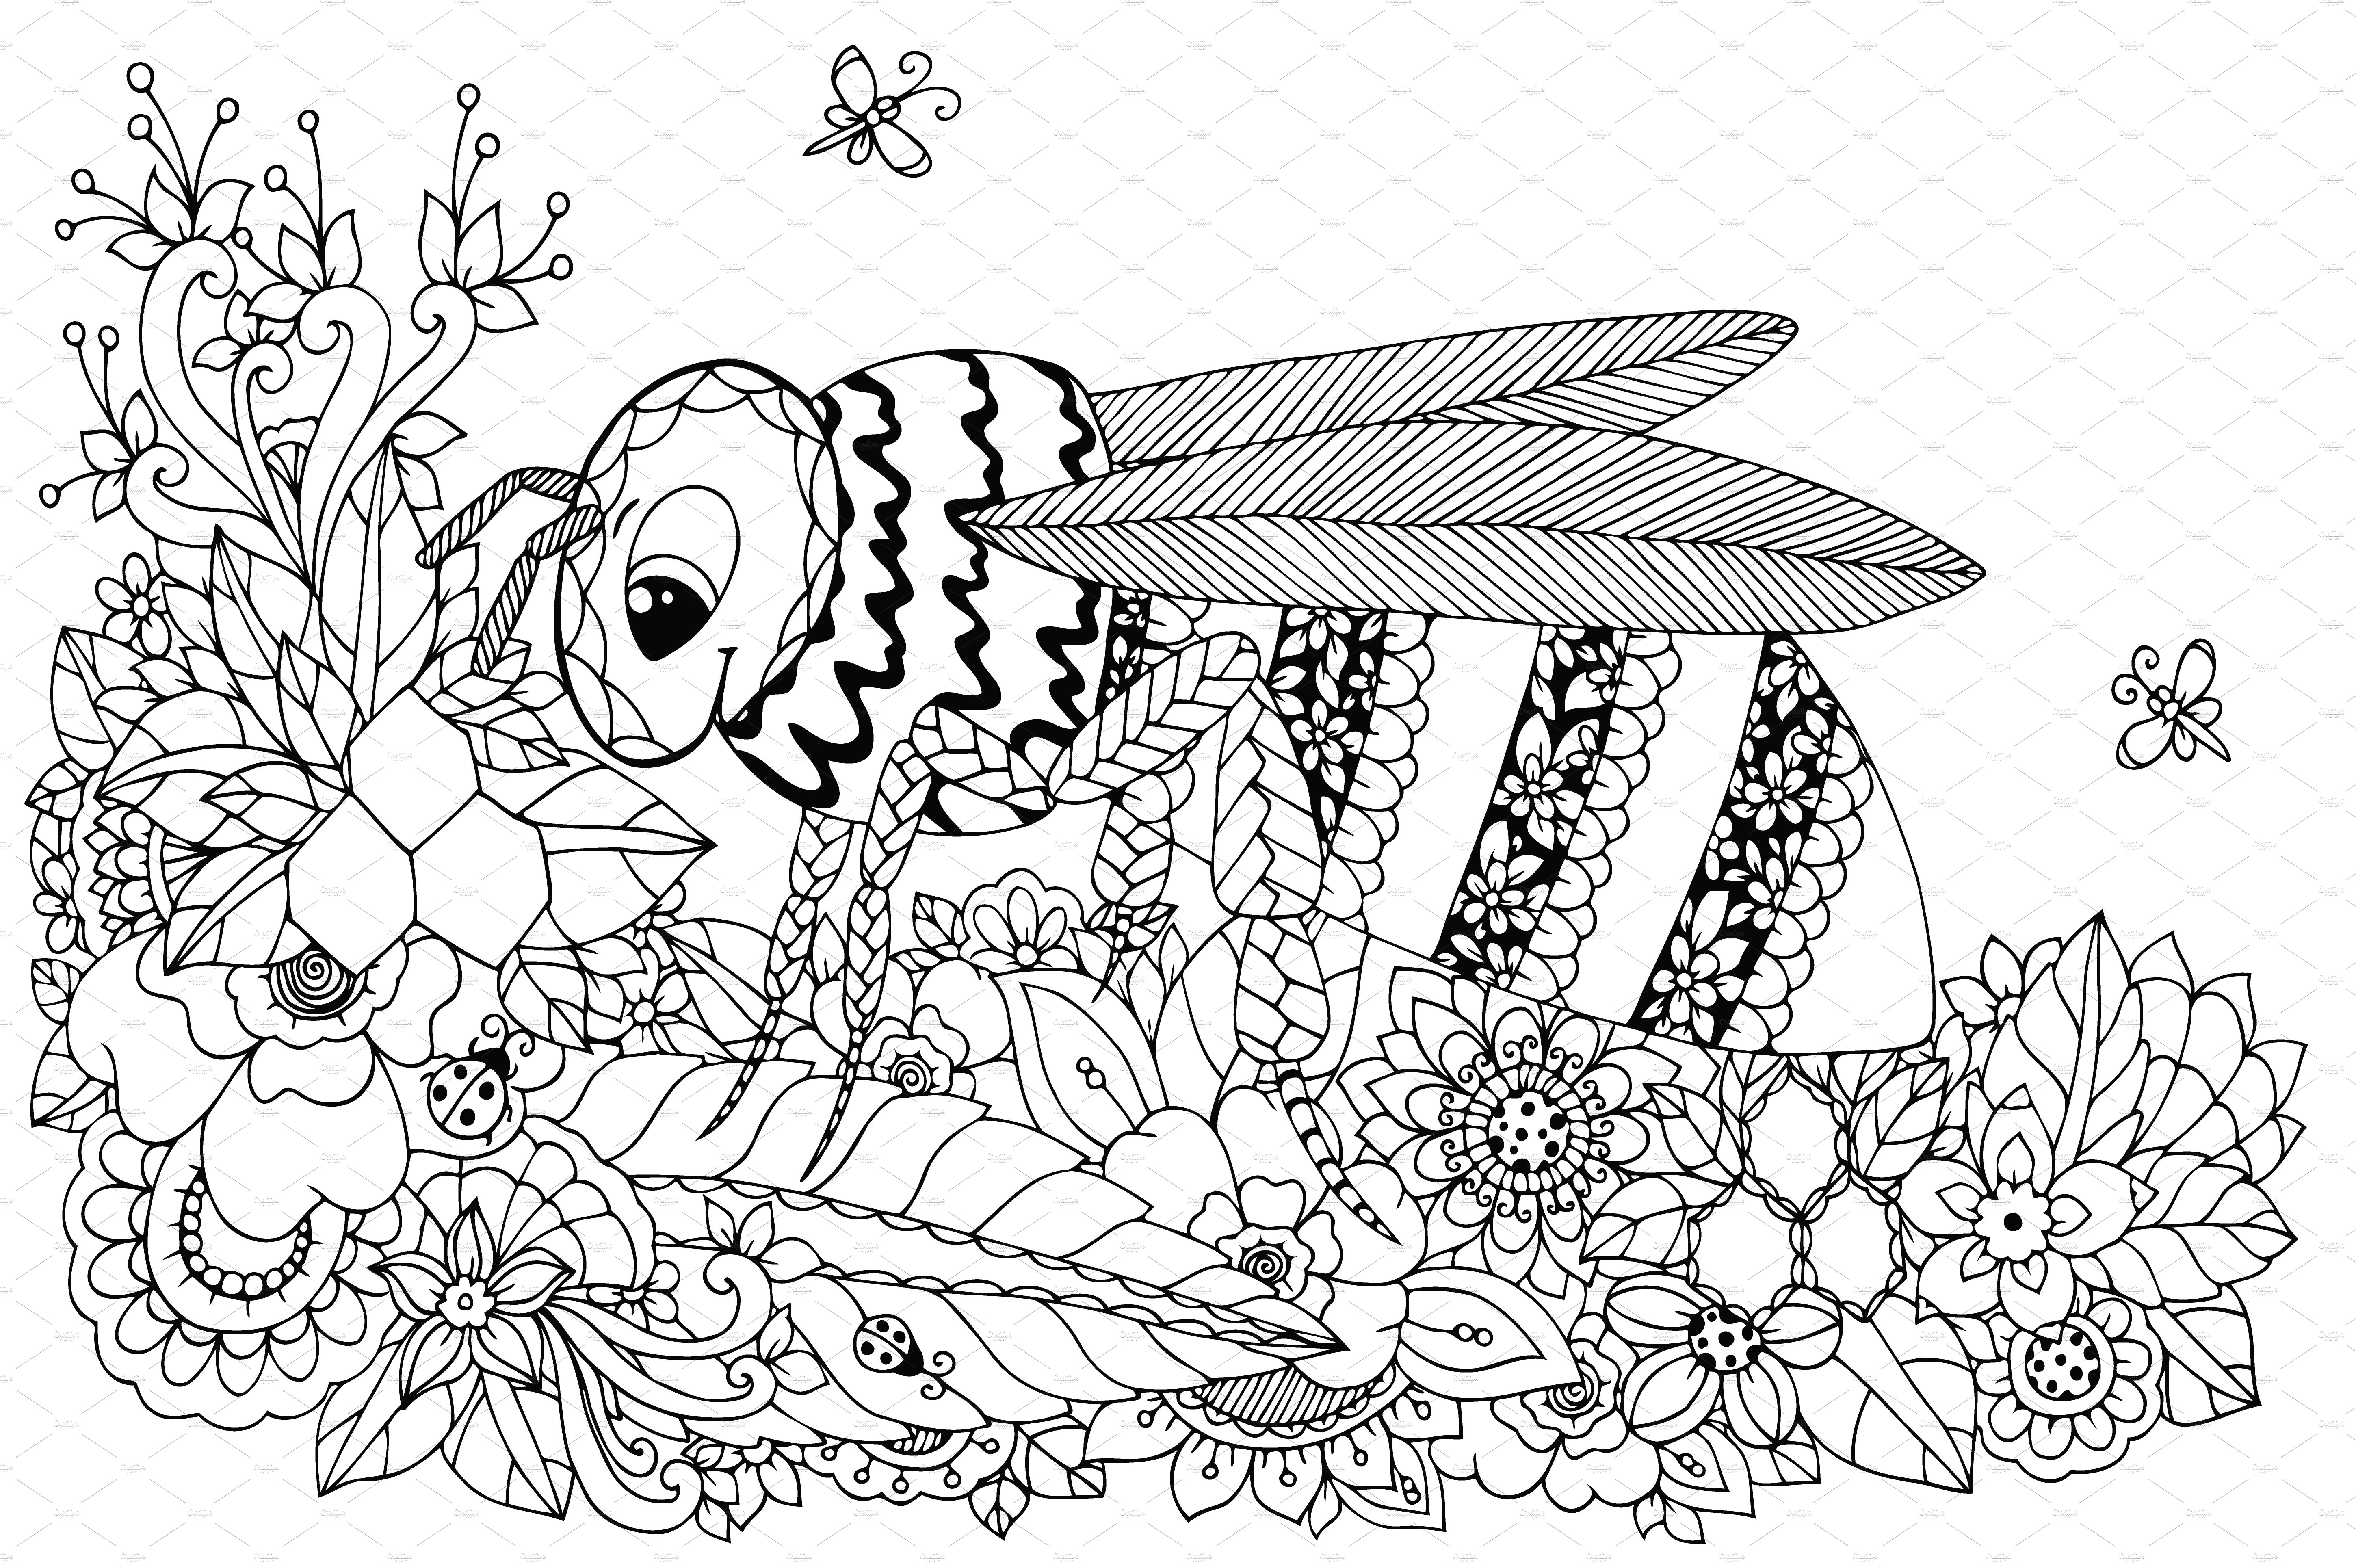 Doodle Wasp in flowers cover image.